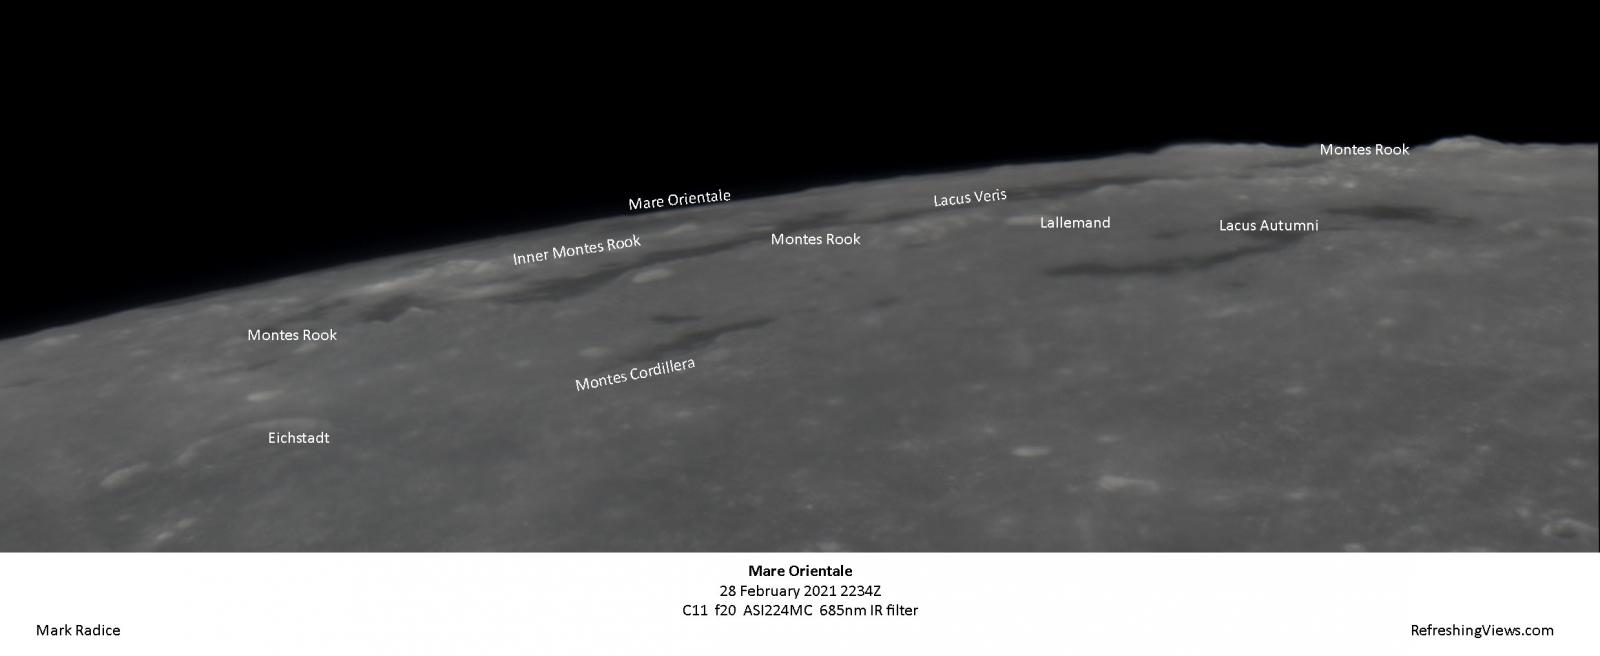 Mare Orientale - 26 Feb - Lunar Observing and Imaging picture